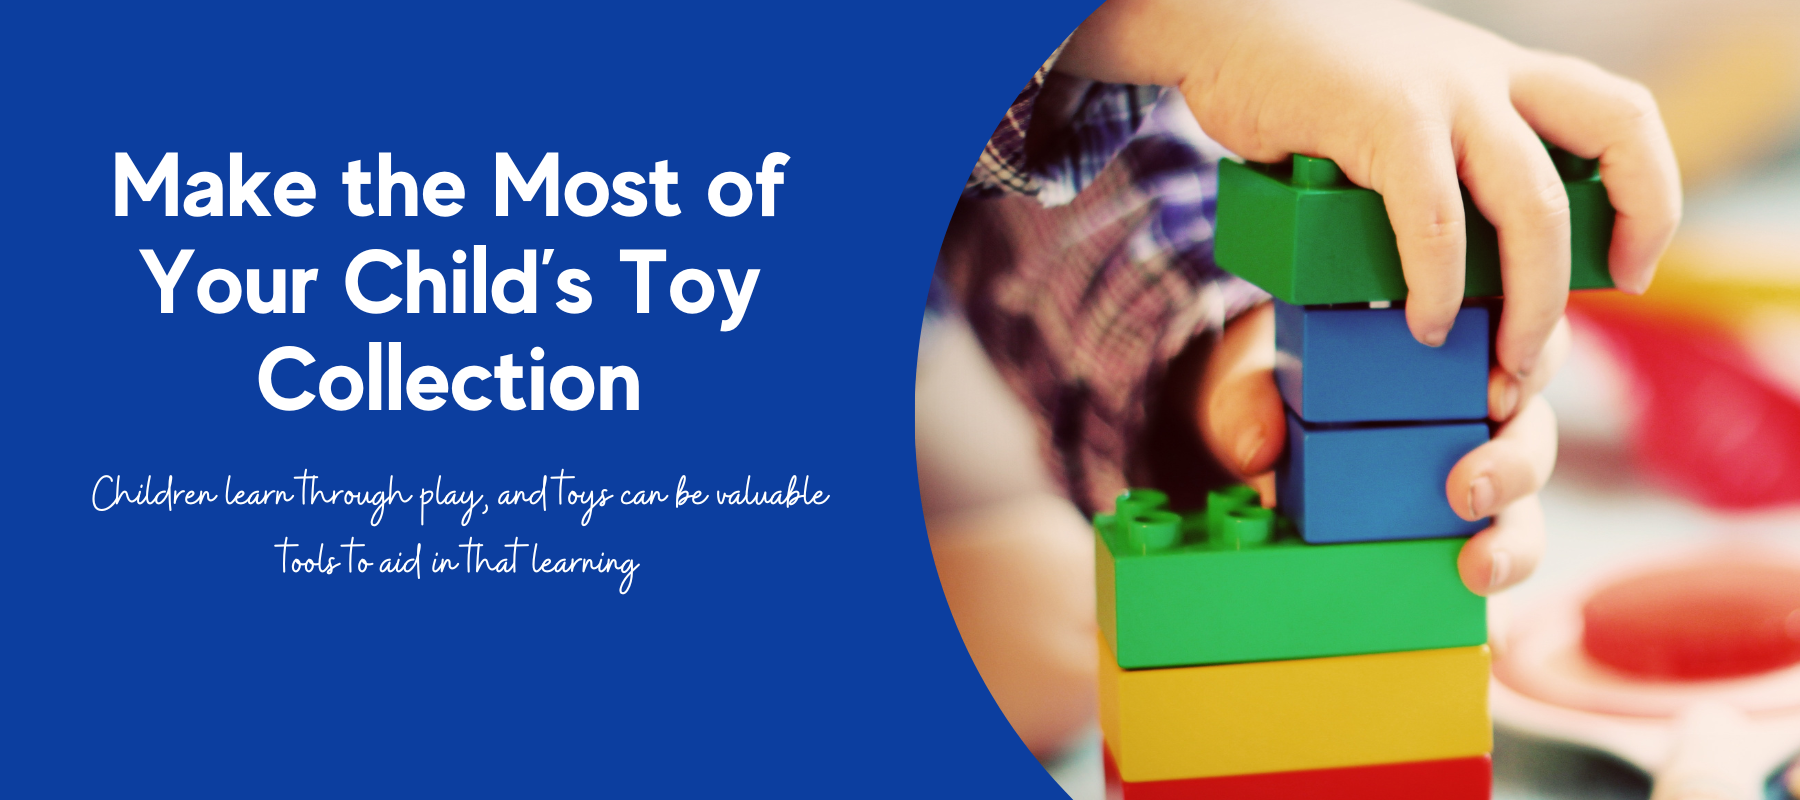 Make the Most of Your Child’s Toy Collection